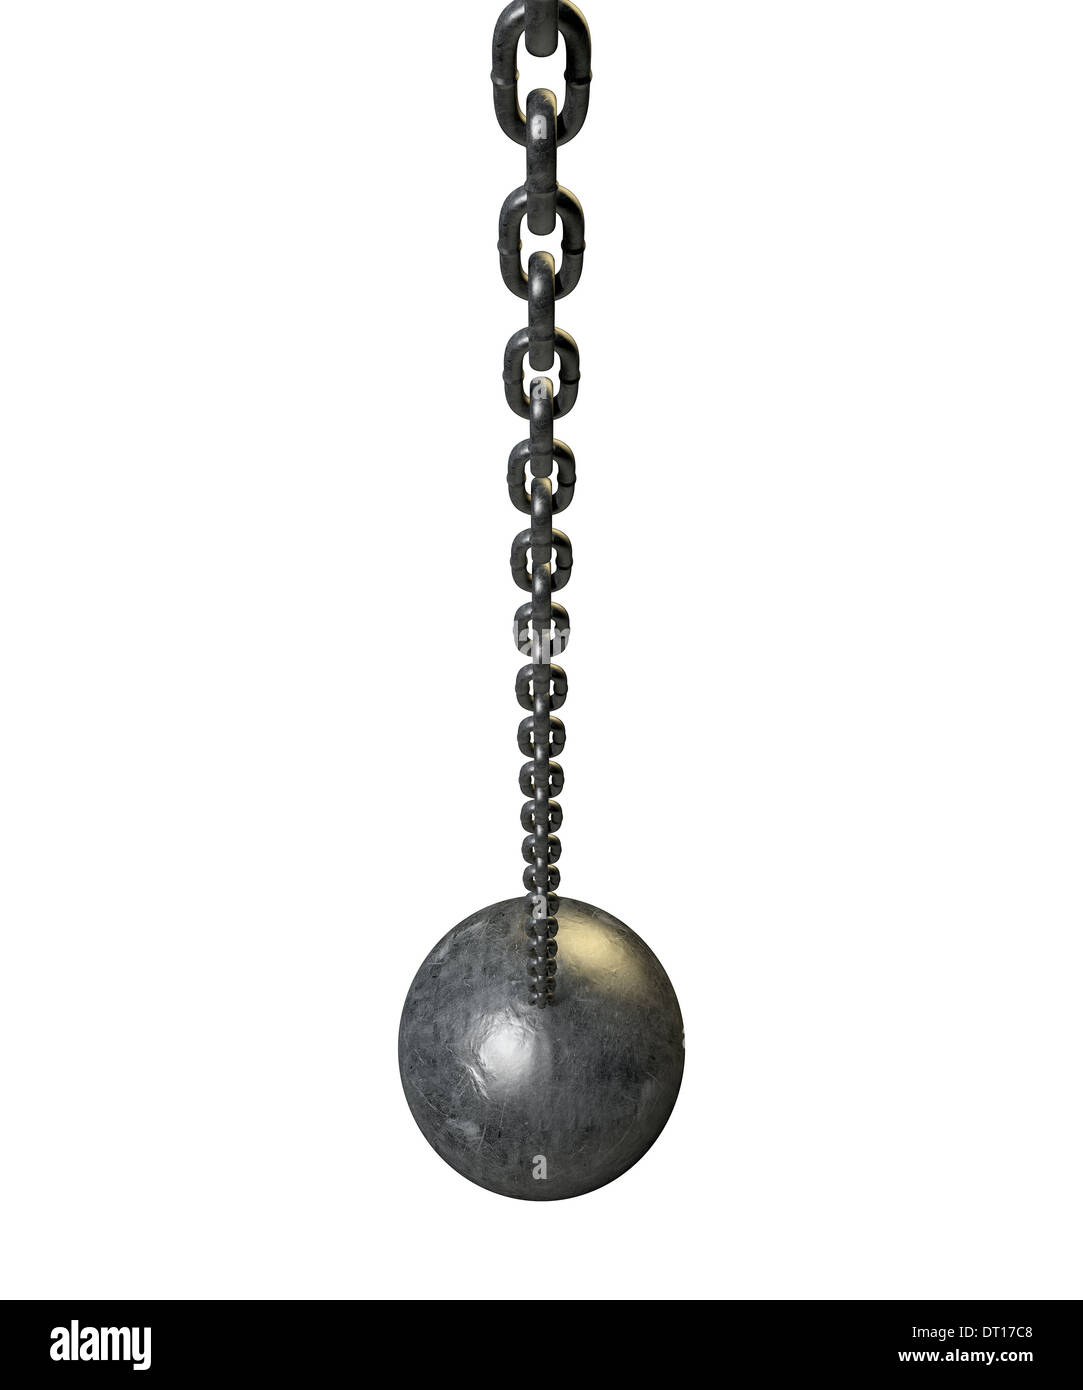 A regular metal wrecking ball attached to a chain on an isolated white background Stock Photo